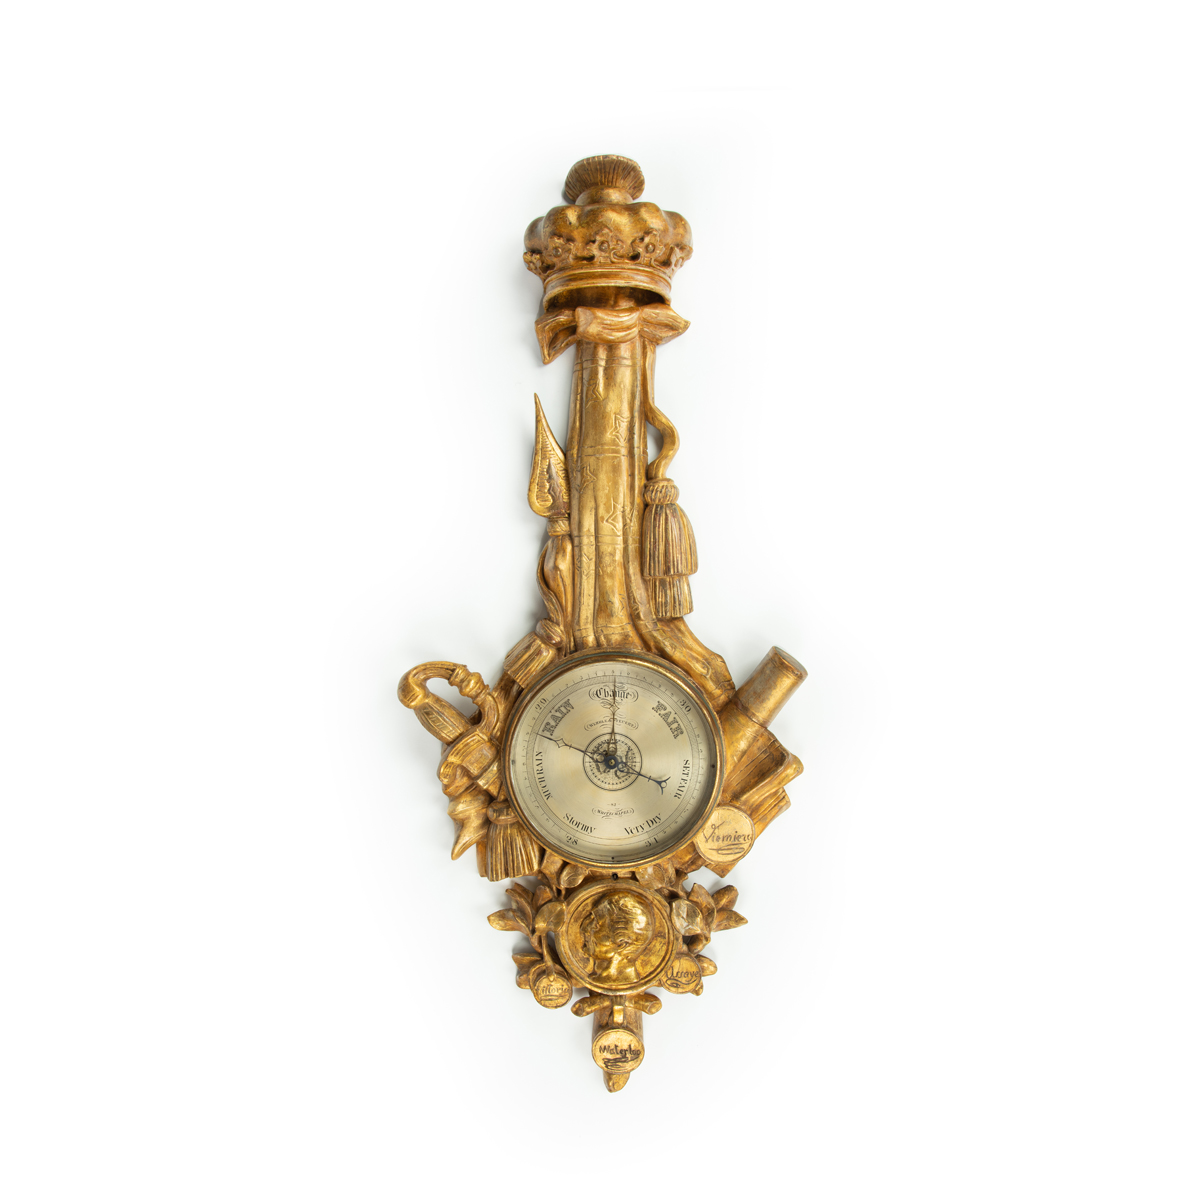 A Wellington commemorative barometer retailed by Wehrle and Steuert